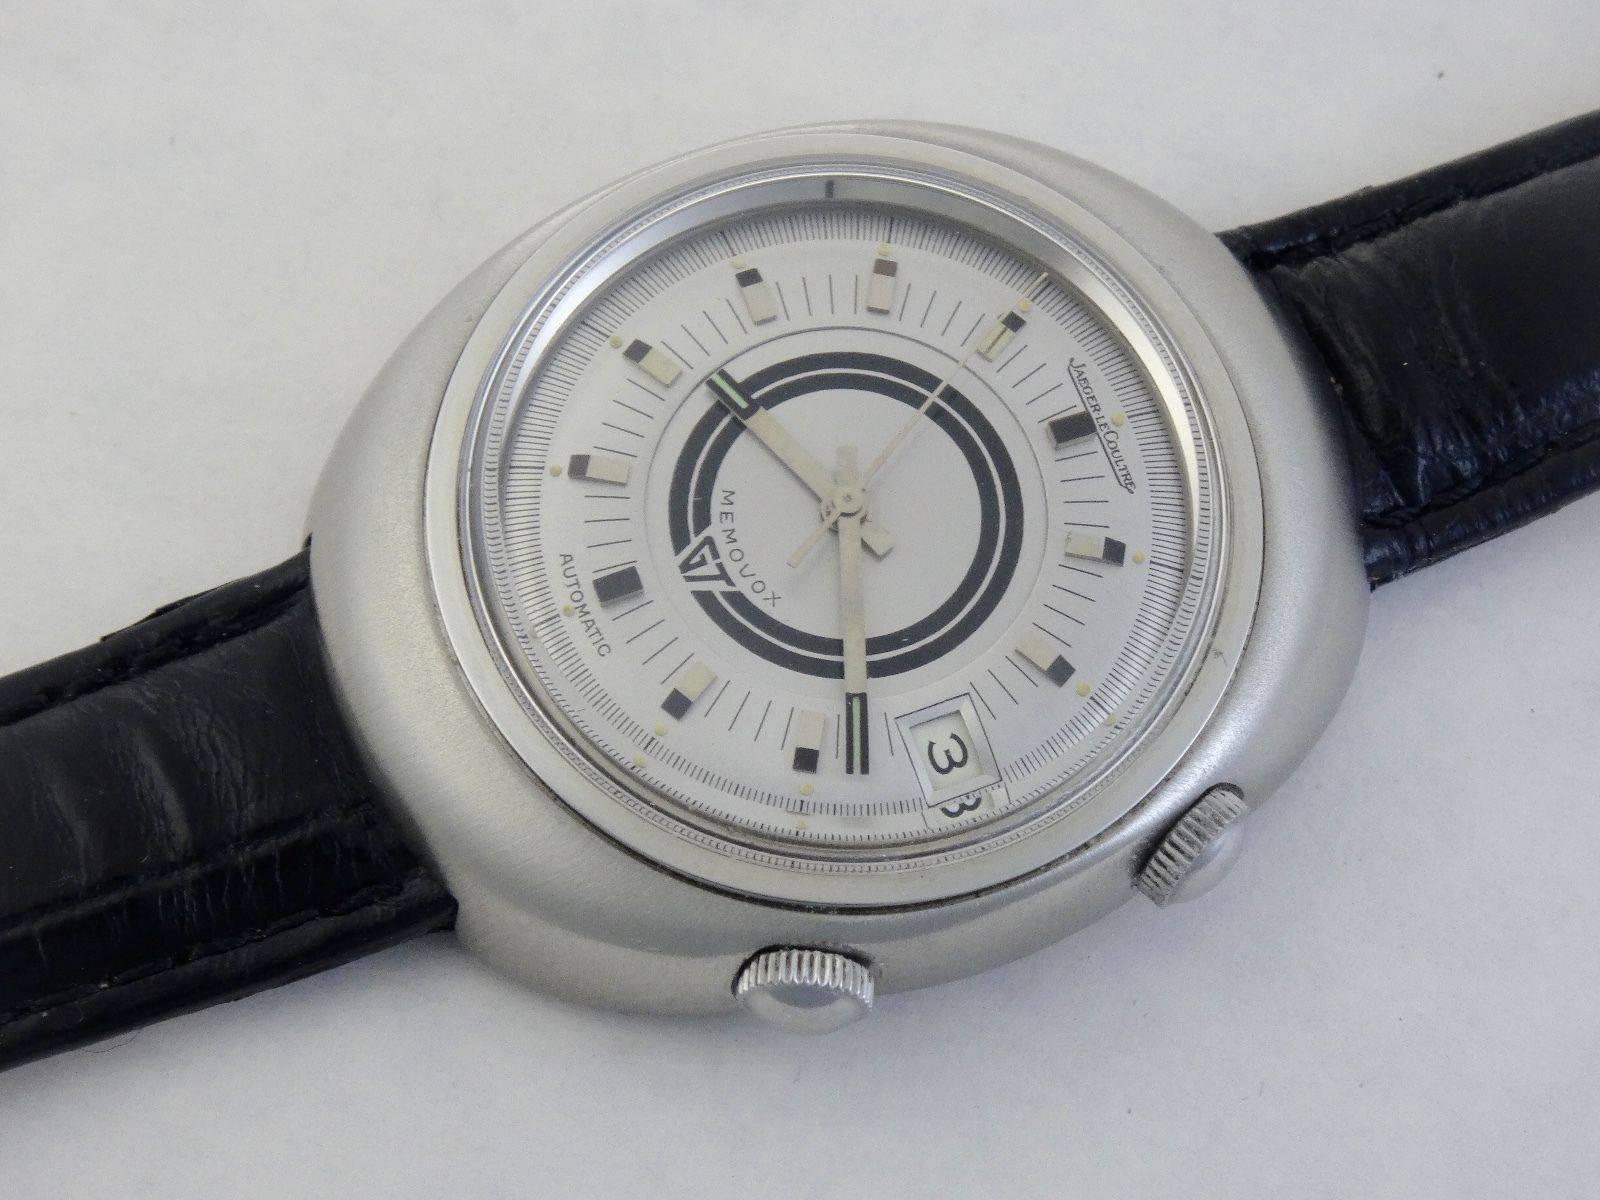 Contemporary Jaeger-LeCoultre Stainless Steel Memovox Alarm Wristwatch Ref E861, circa 1970